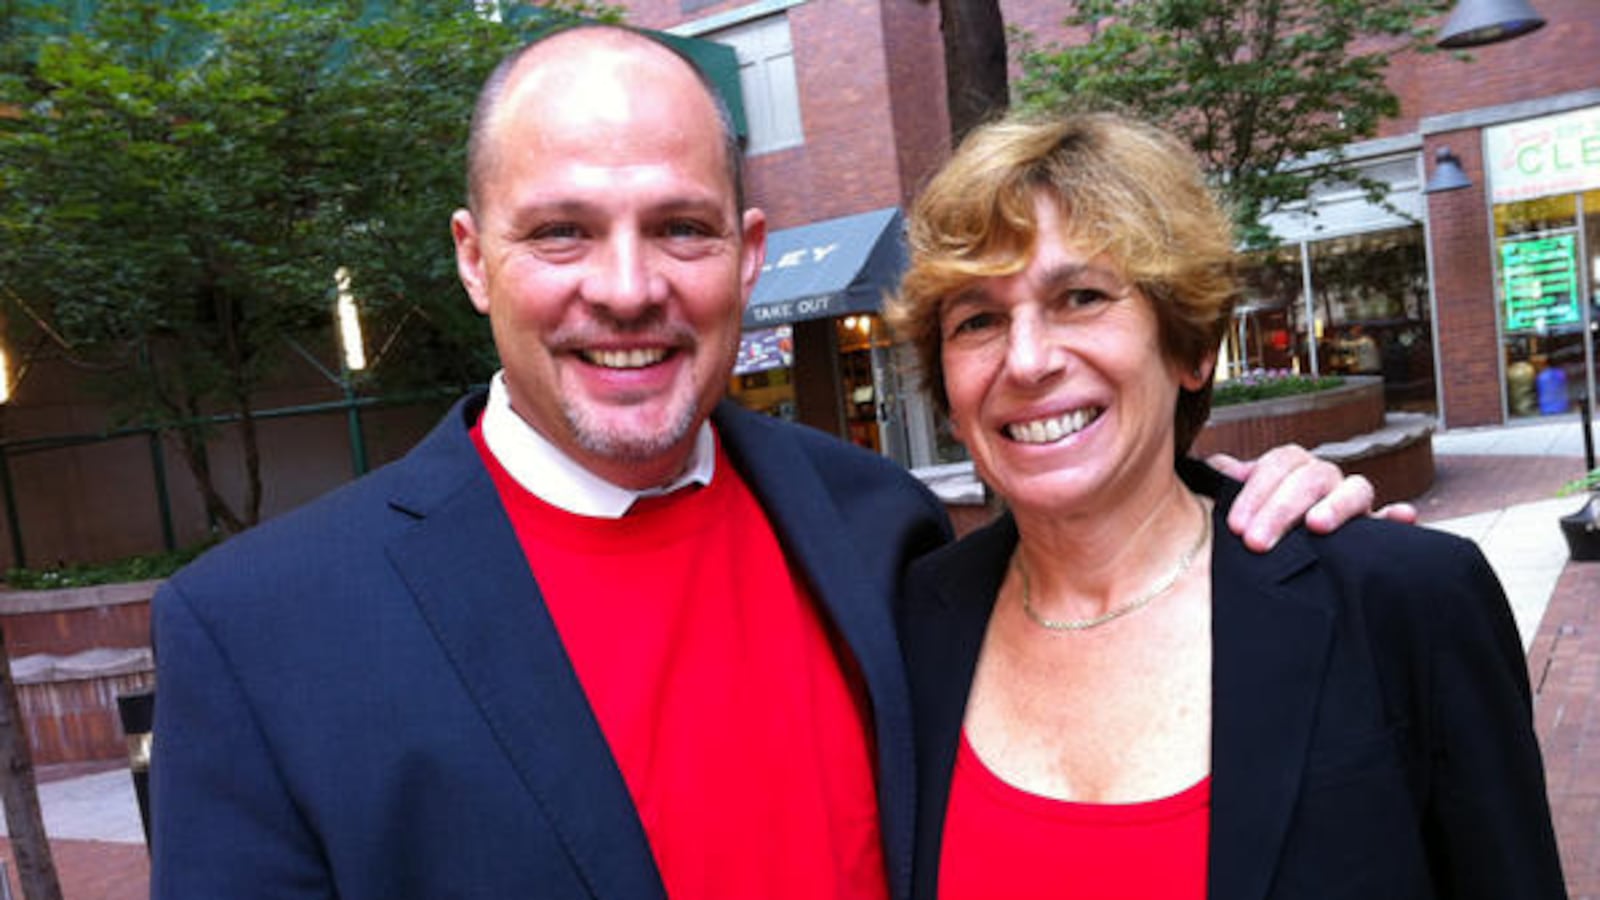 In a picture the UFT distributed on Twitter, President Michael Mulgrew and AFT President Randi Weingarten wear red in Sept. 2012 to show solidarity with teachers on strike in Chicago.